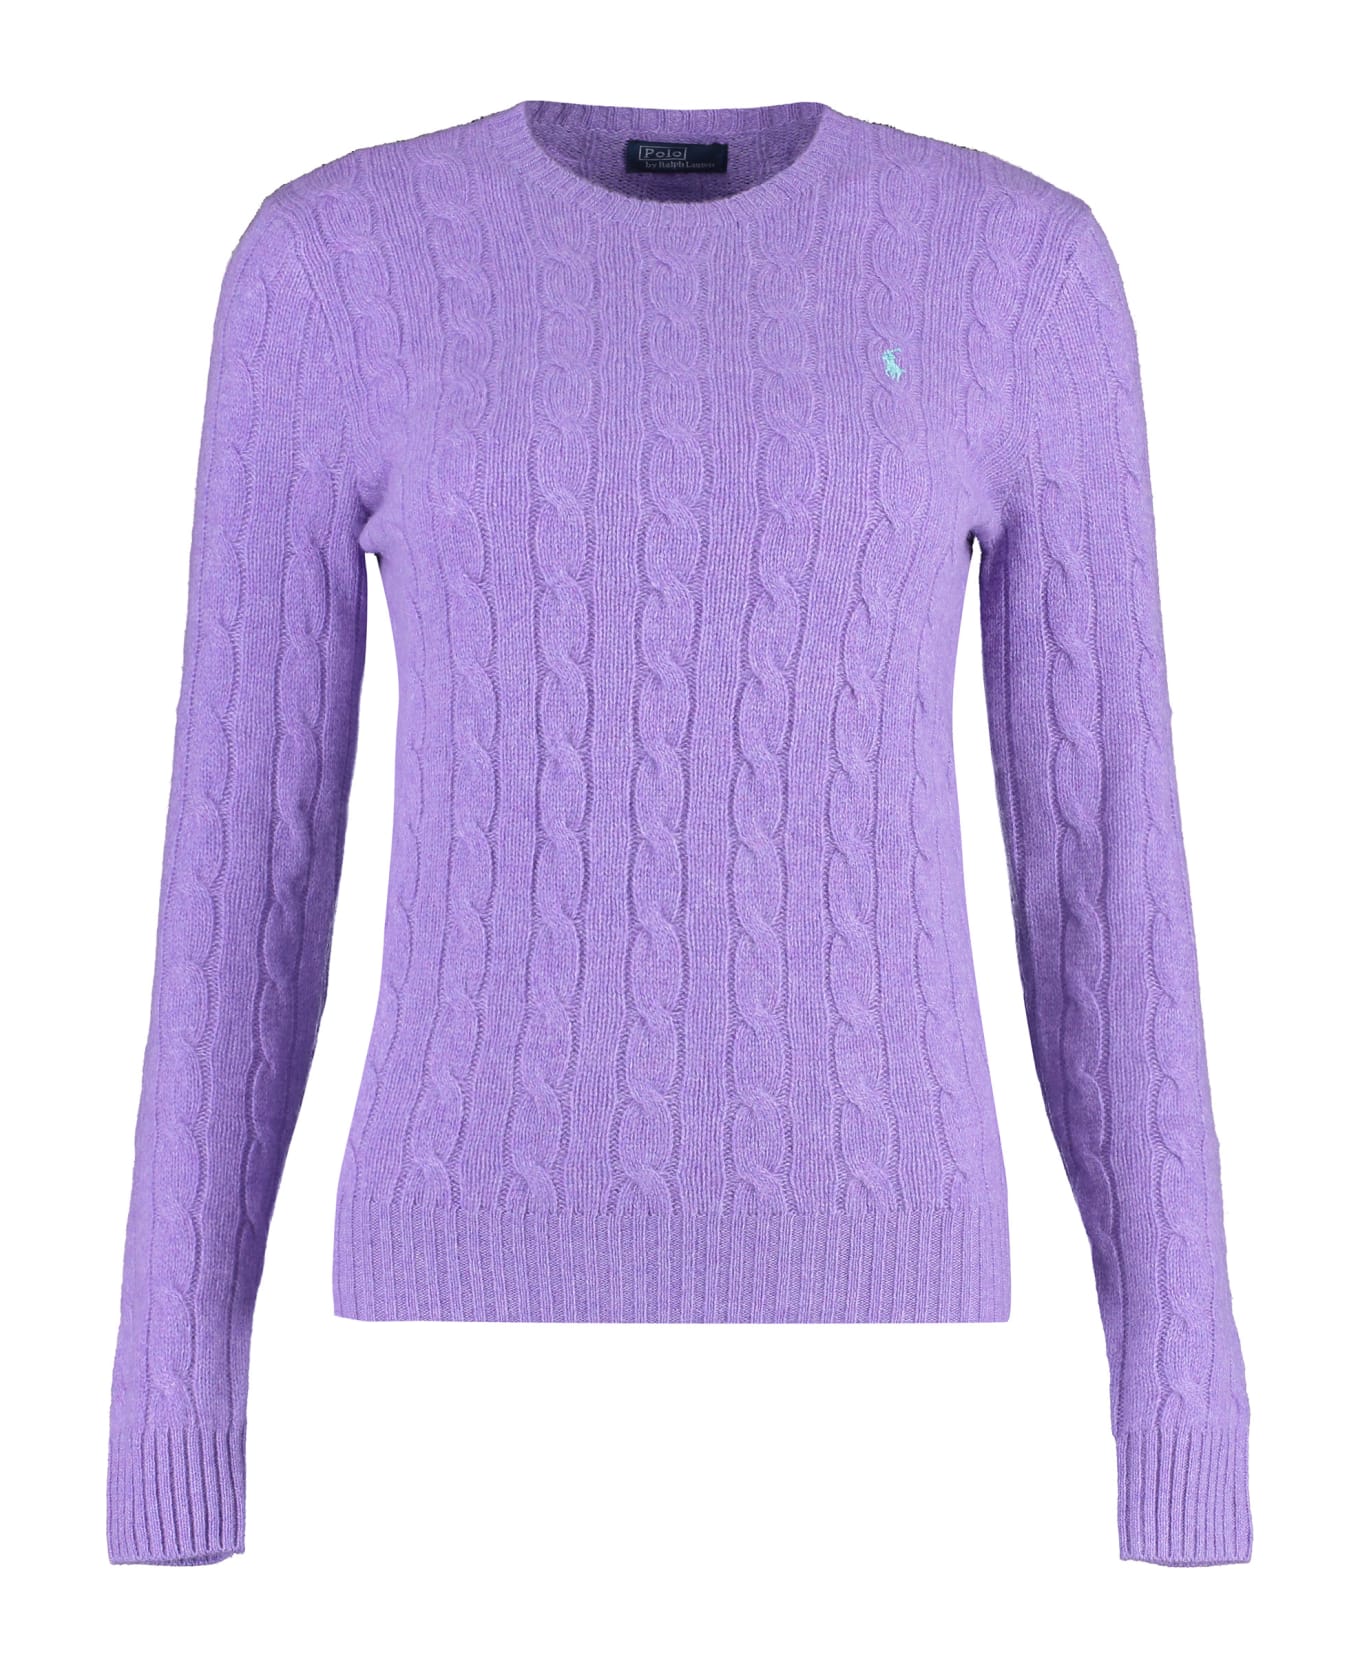 Polo Ralph Lauren Wool And Cashmere Blend Pullover - Purple